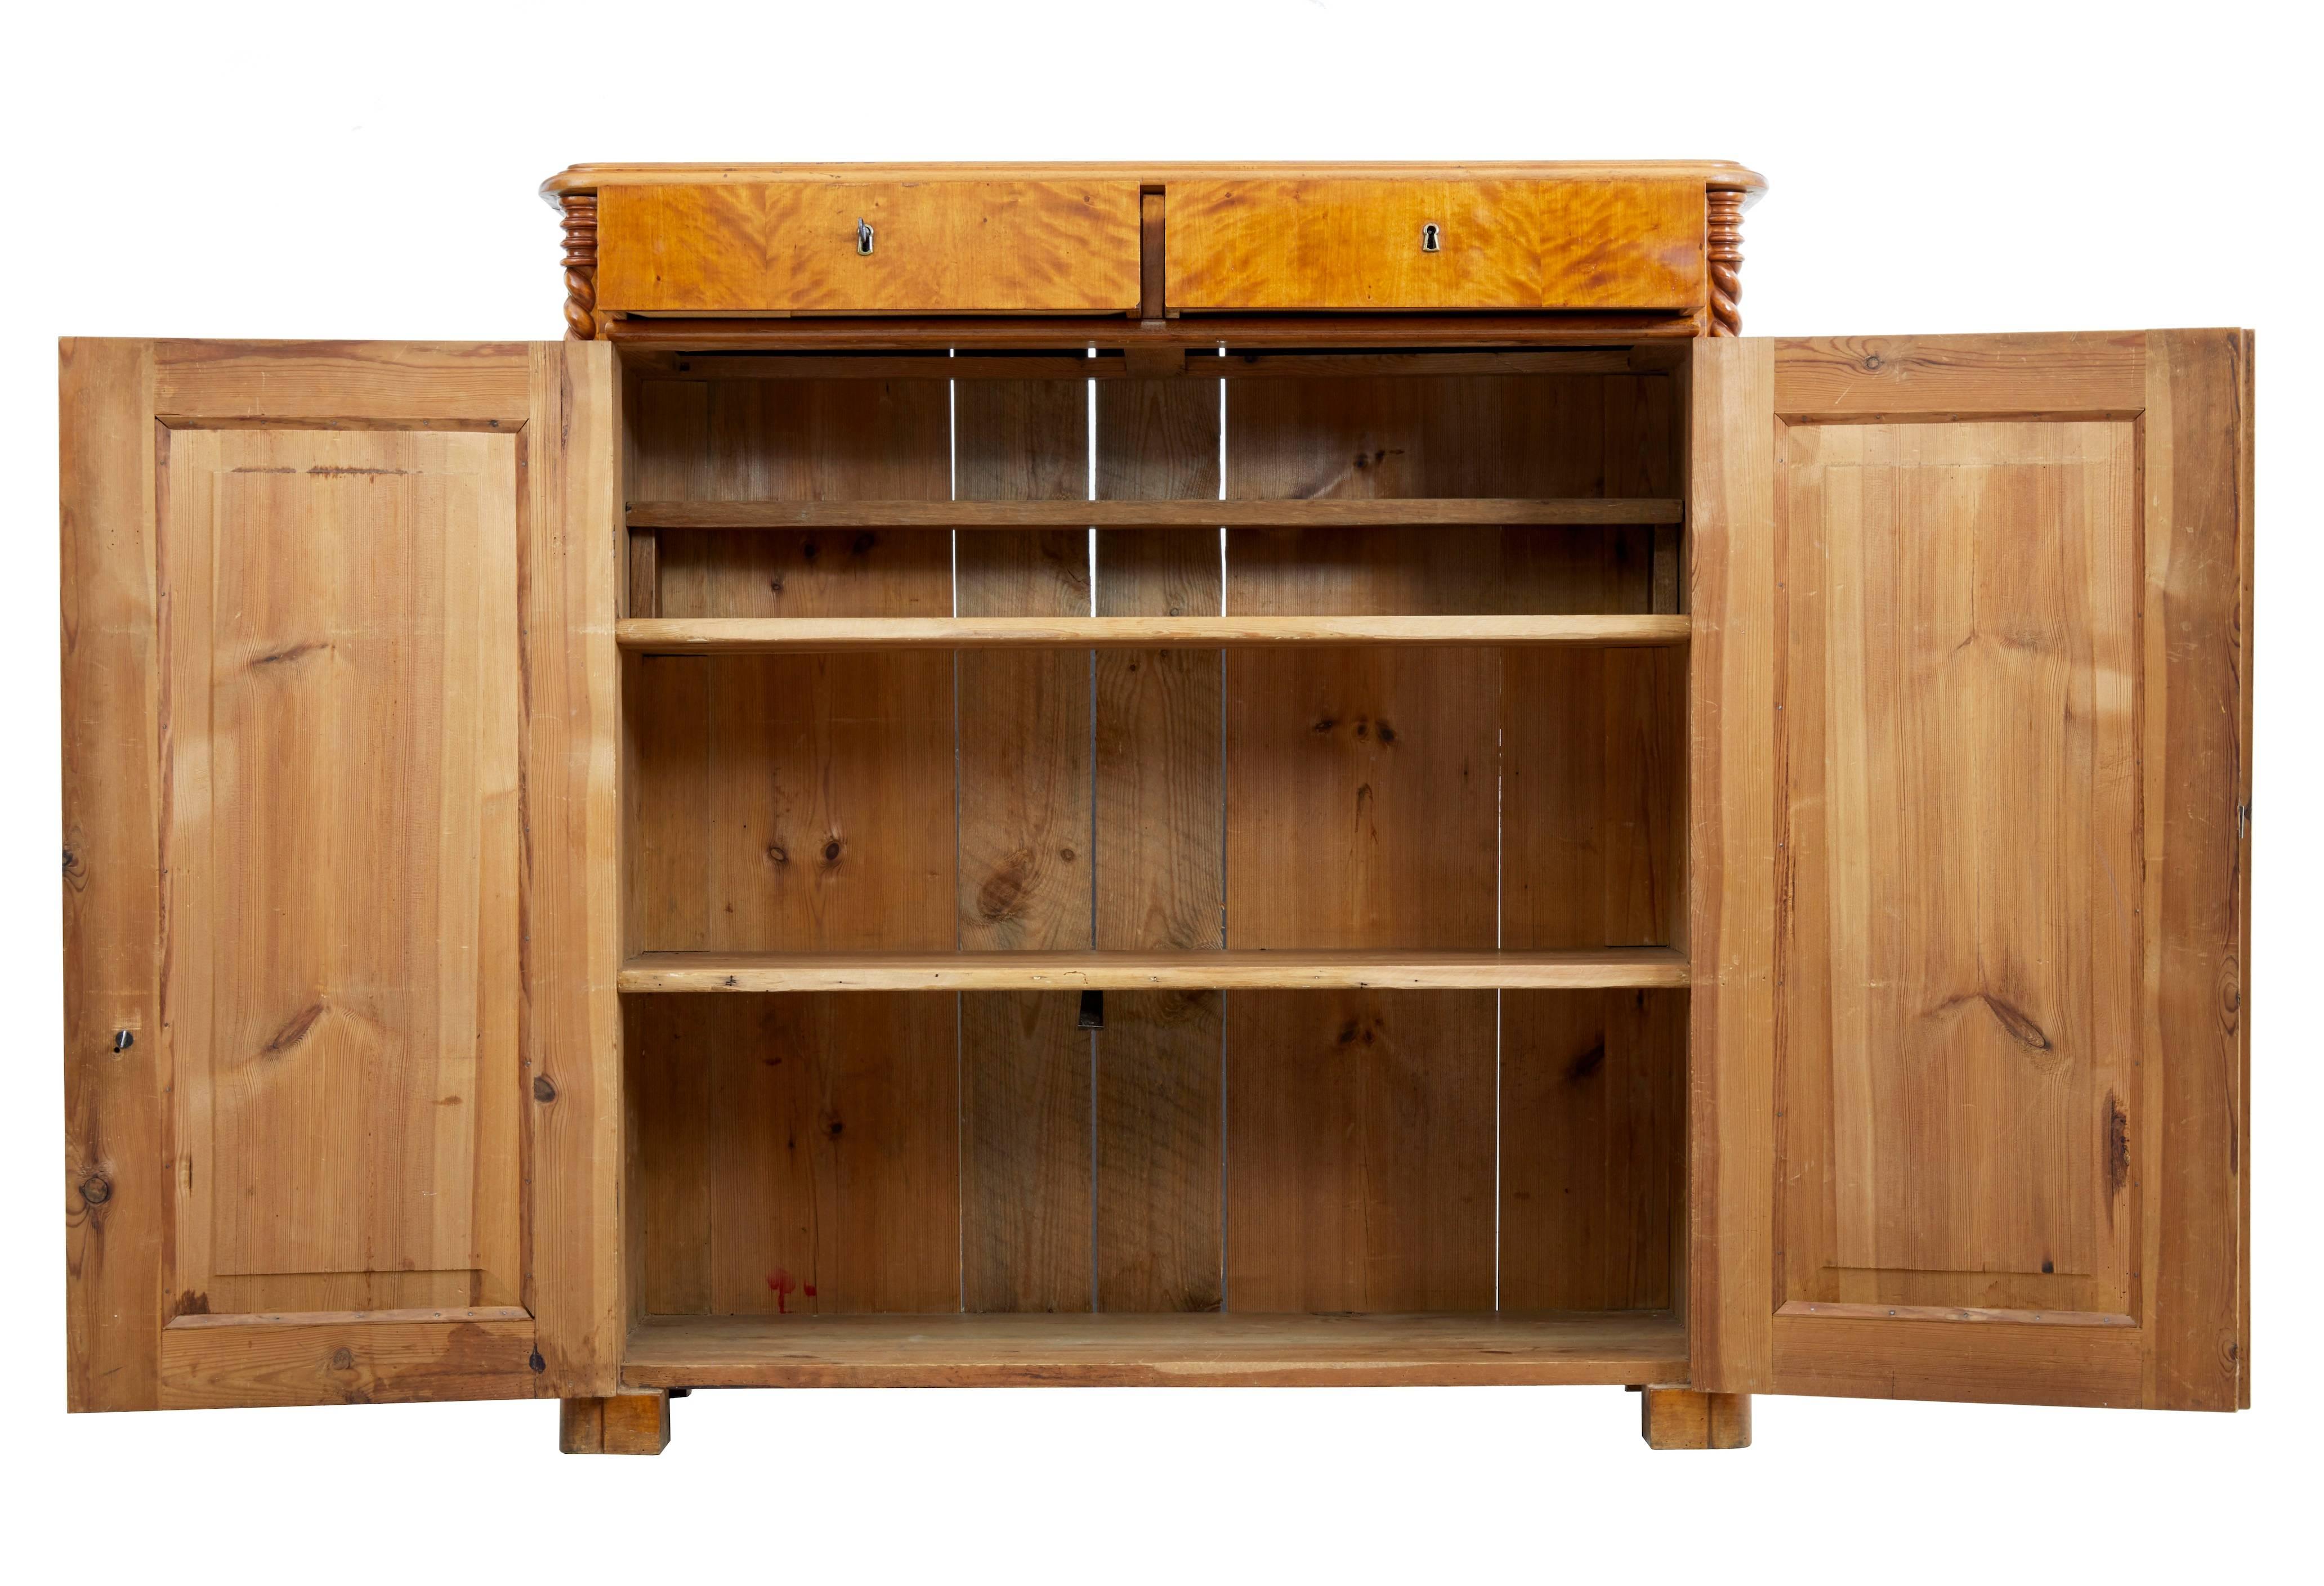 Swedish birch sideboard or cupboard, circa 1870.
Rich varnished birch color.
Two drawers with working locks and key. Double doors open to three shelves.
Main feature being the candy twist columns which run the height of the piece.
Standing on